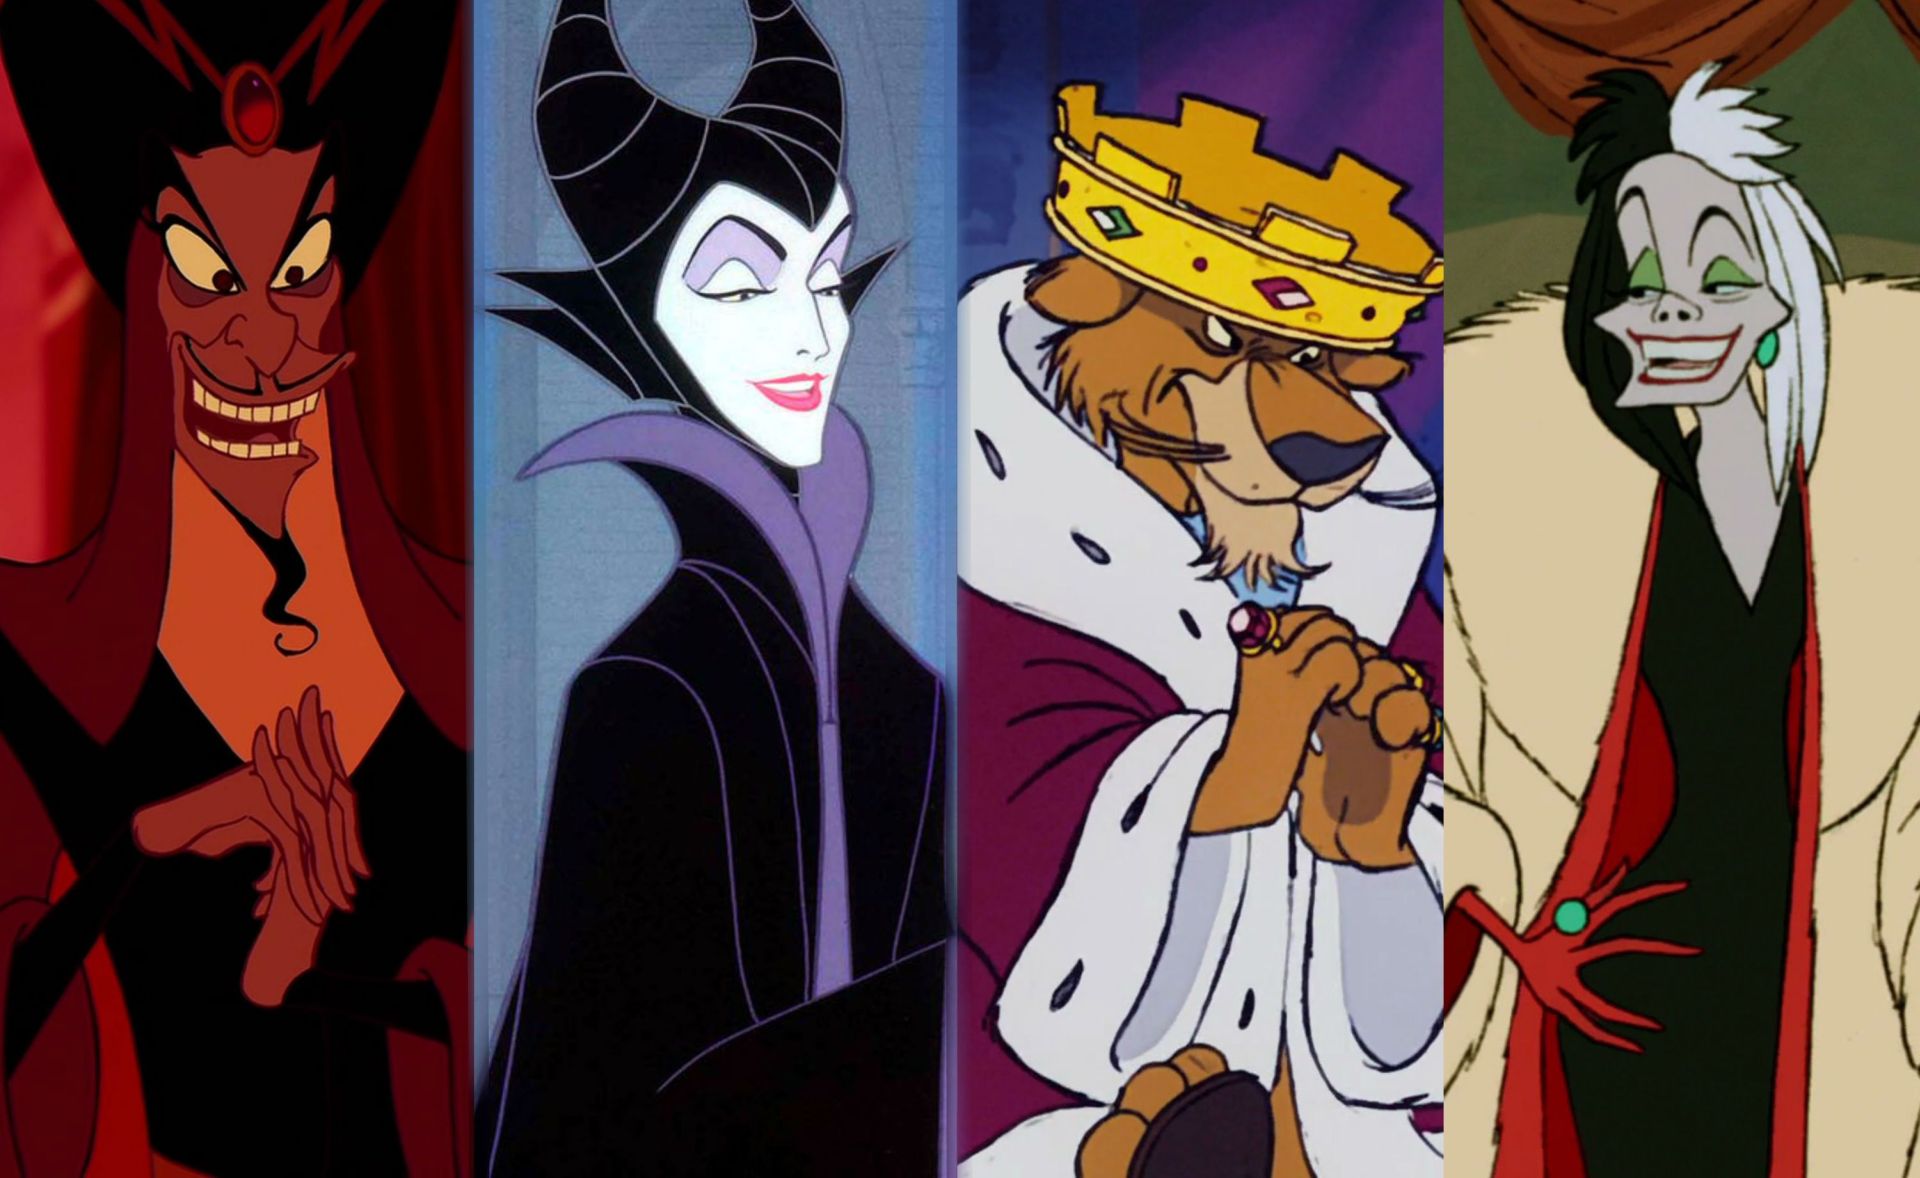 Disney Villains Show Reportedly In Works For Disney+